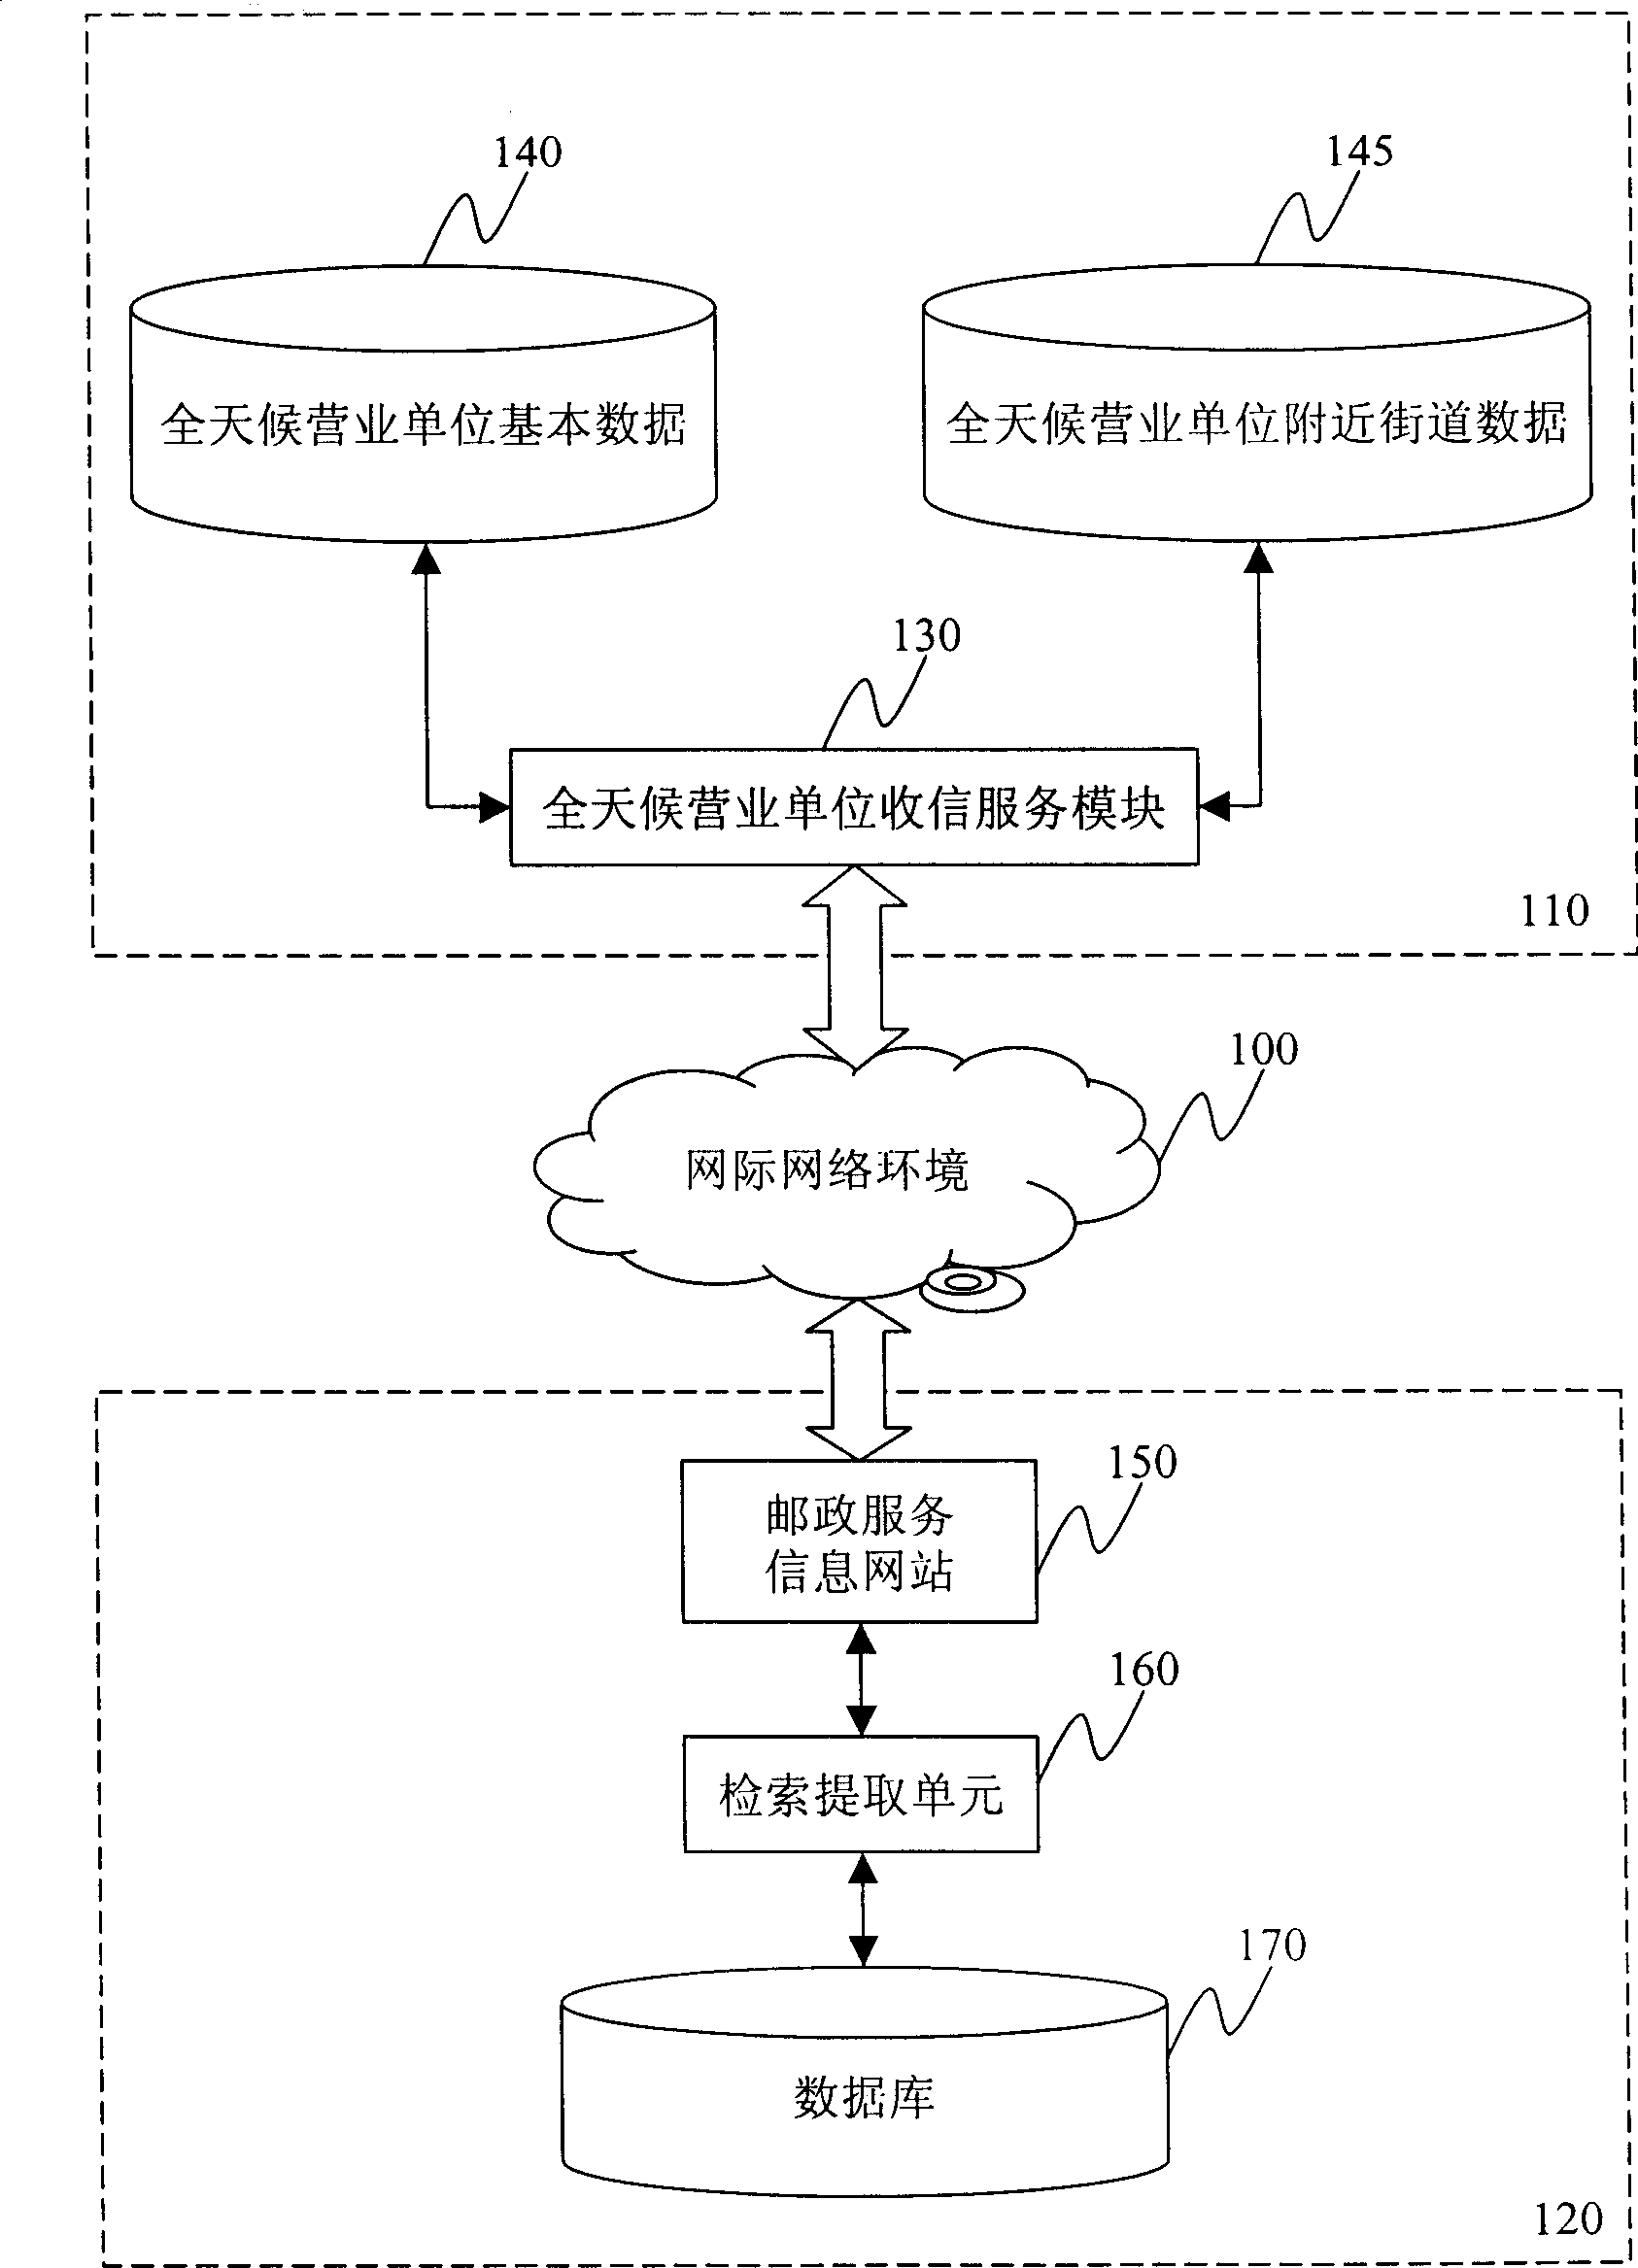 All-weather mail receiving system and method